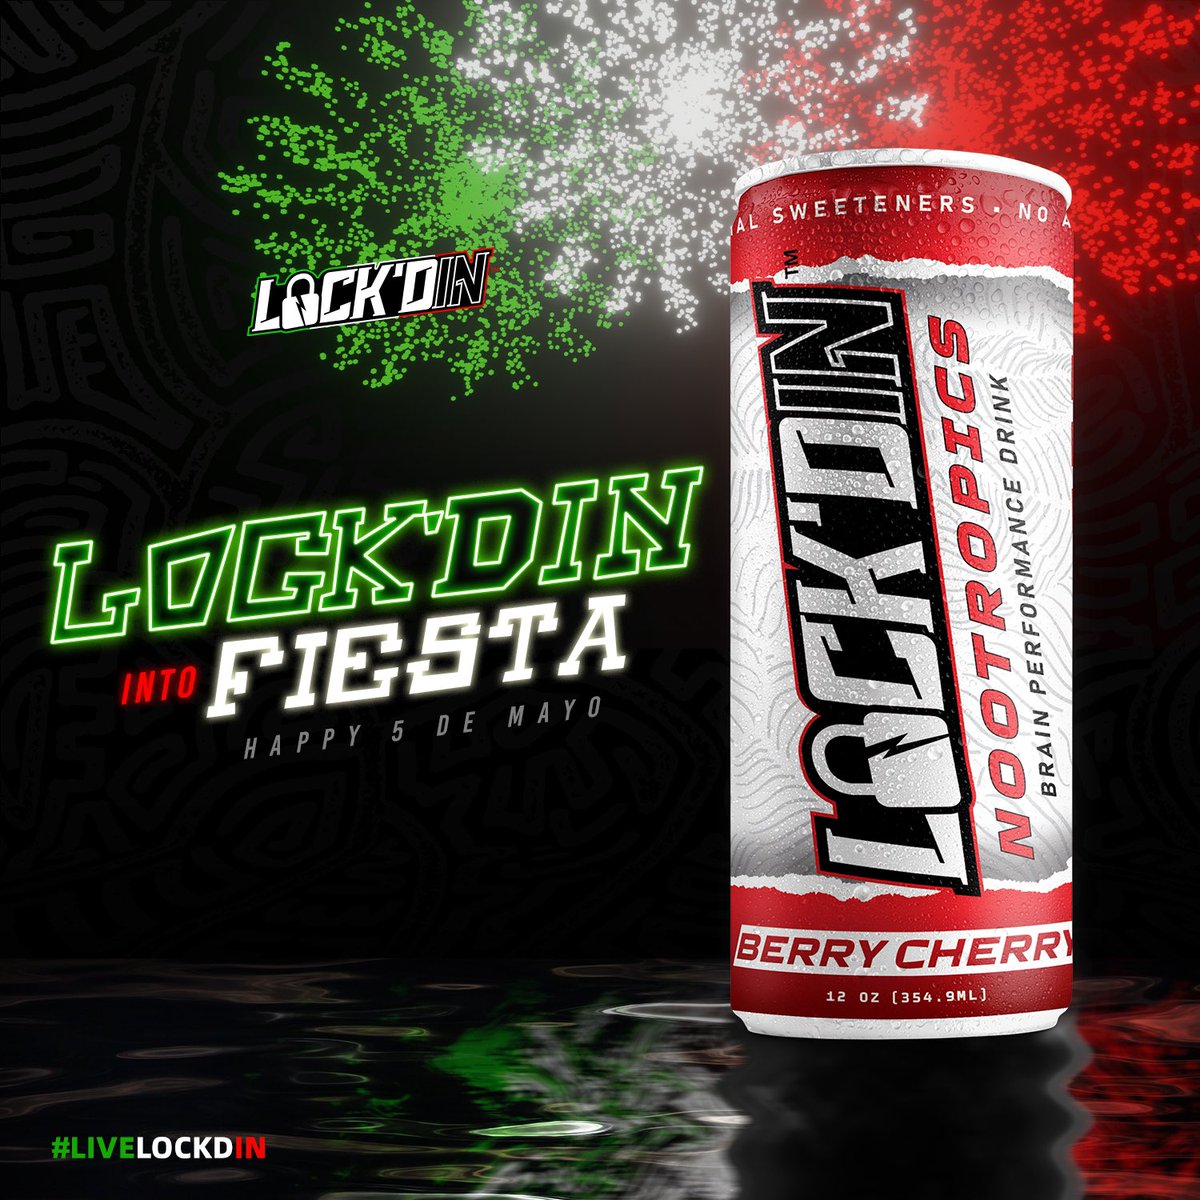 Let the fiesta continue on 5 de Mayo! 🇲🇽 🔒Use code: “WorldChampion” for 15% off!